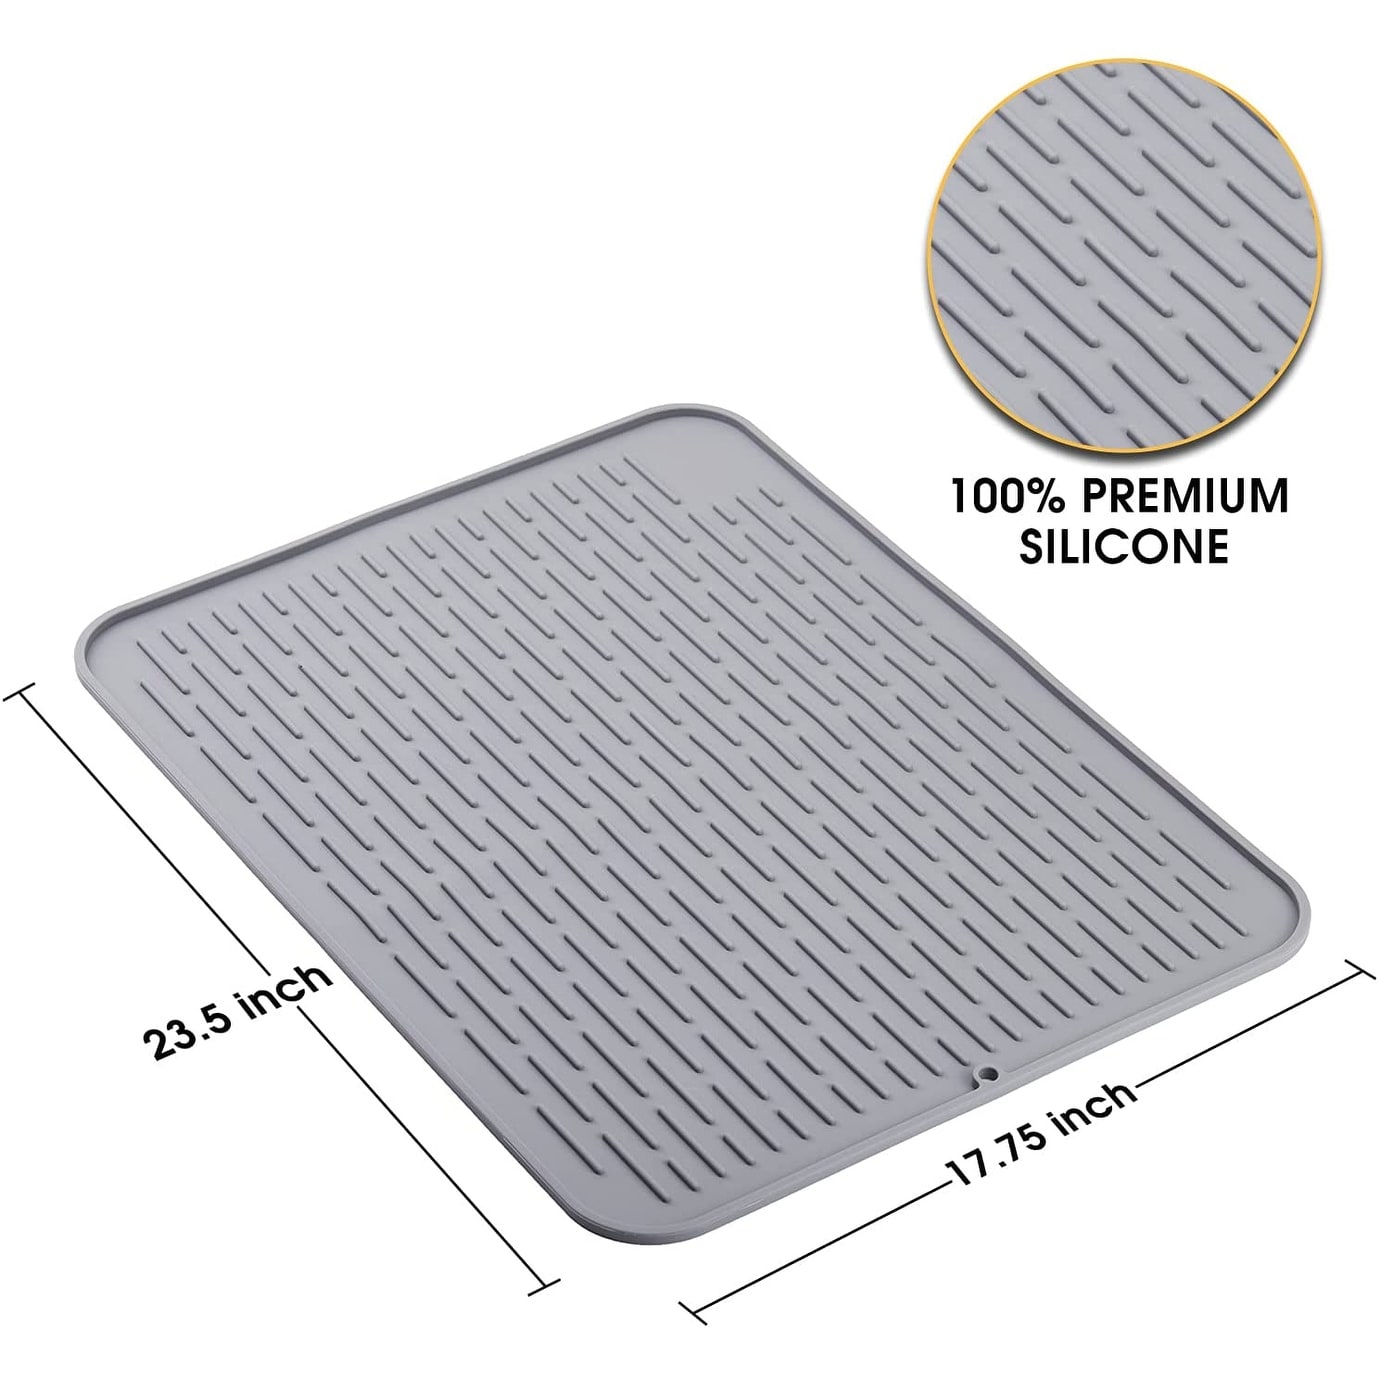 Large Dish Drying Mat for Kitchen Counter - Super-Absorbent Washable Cotton